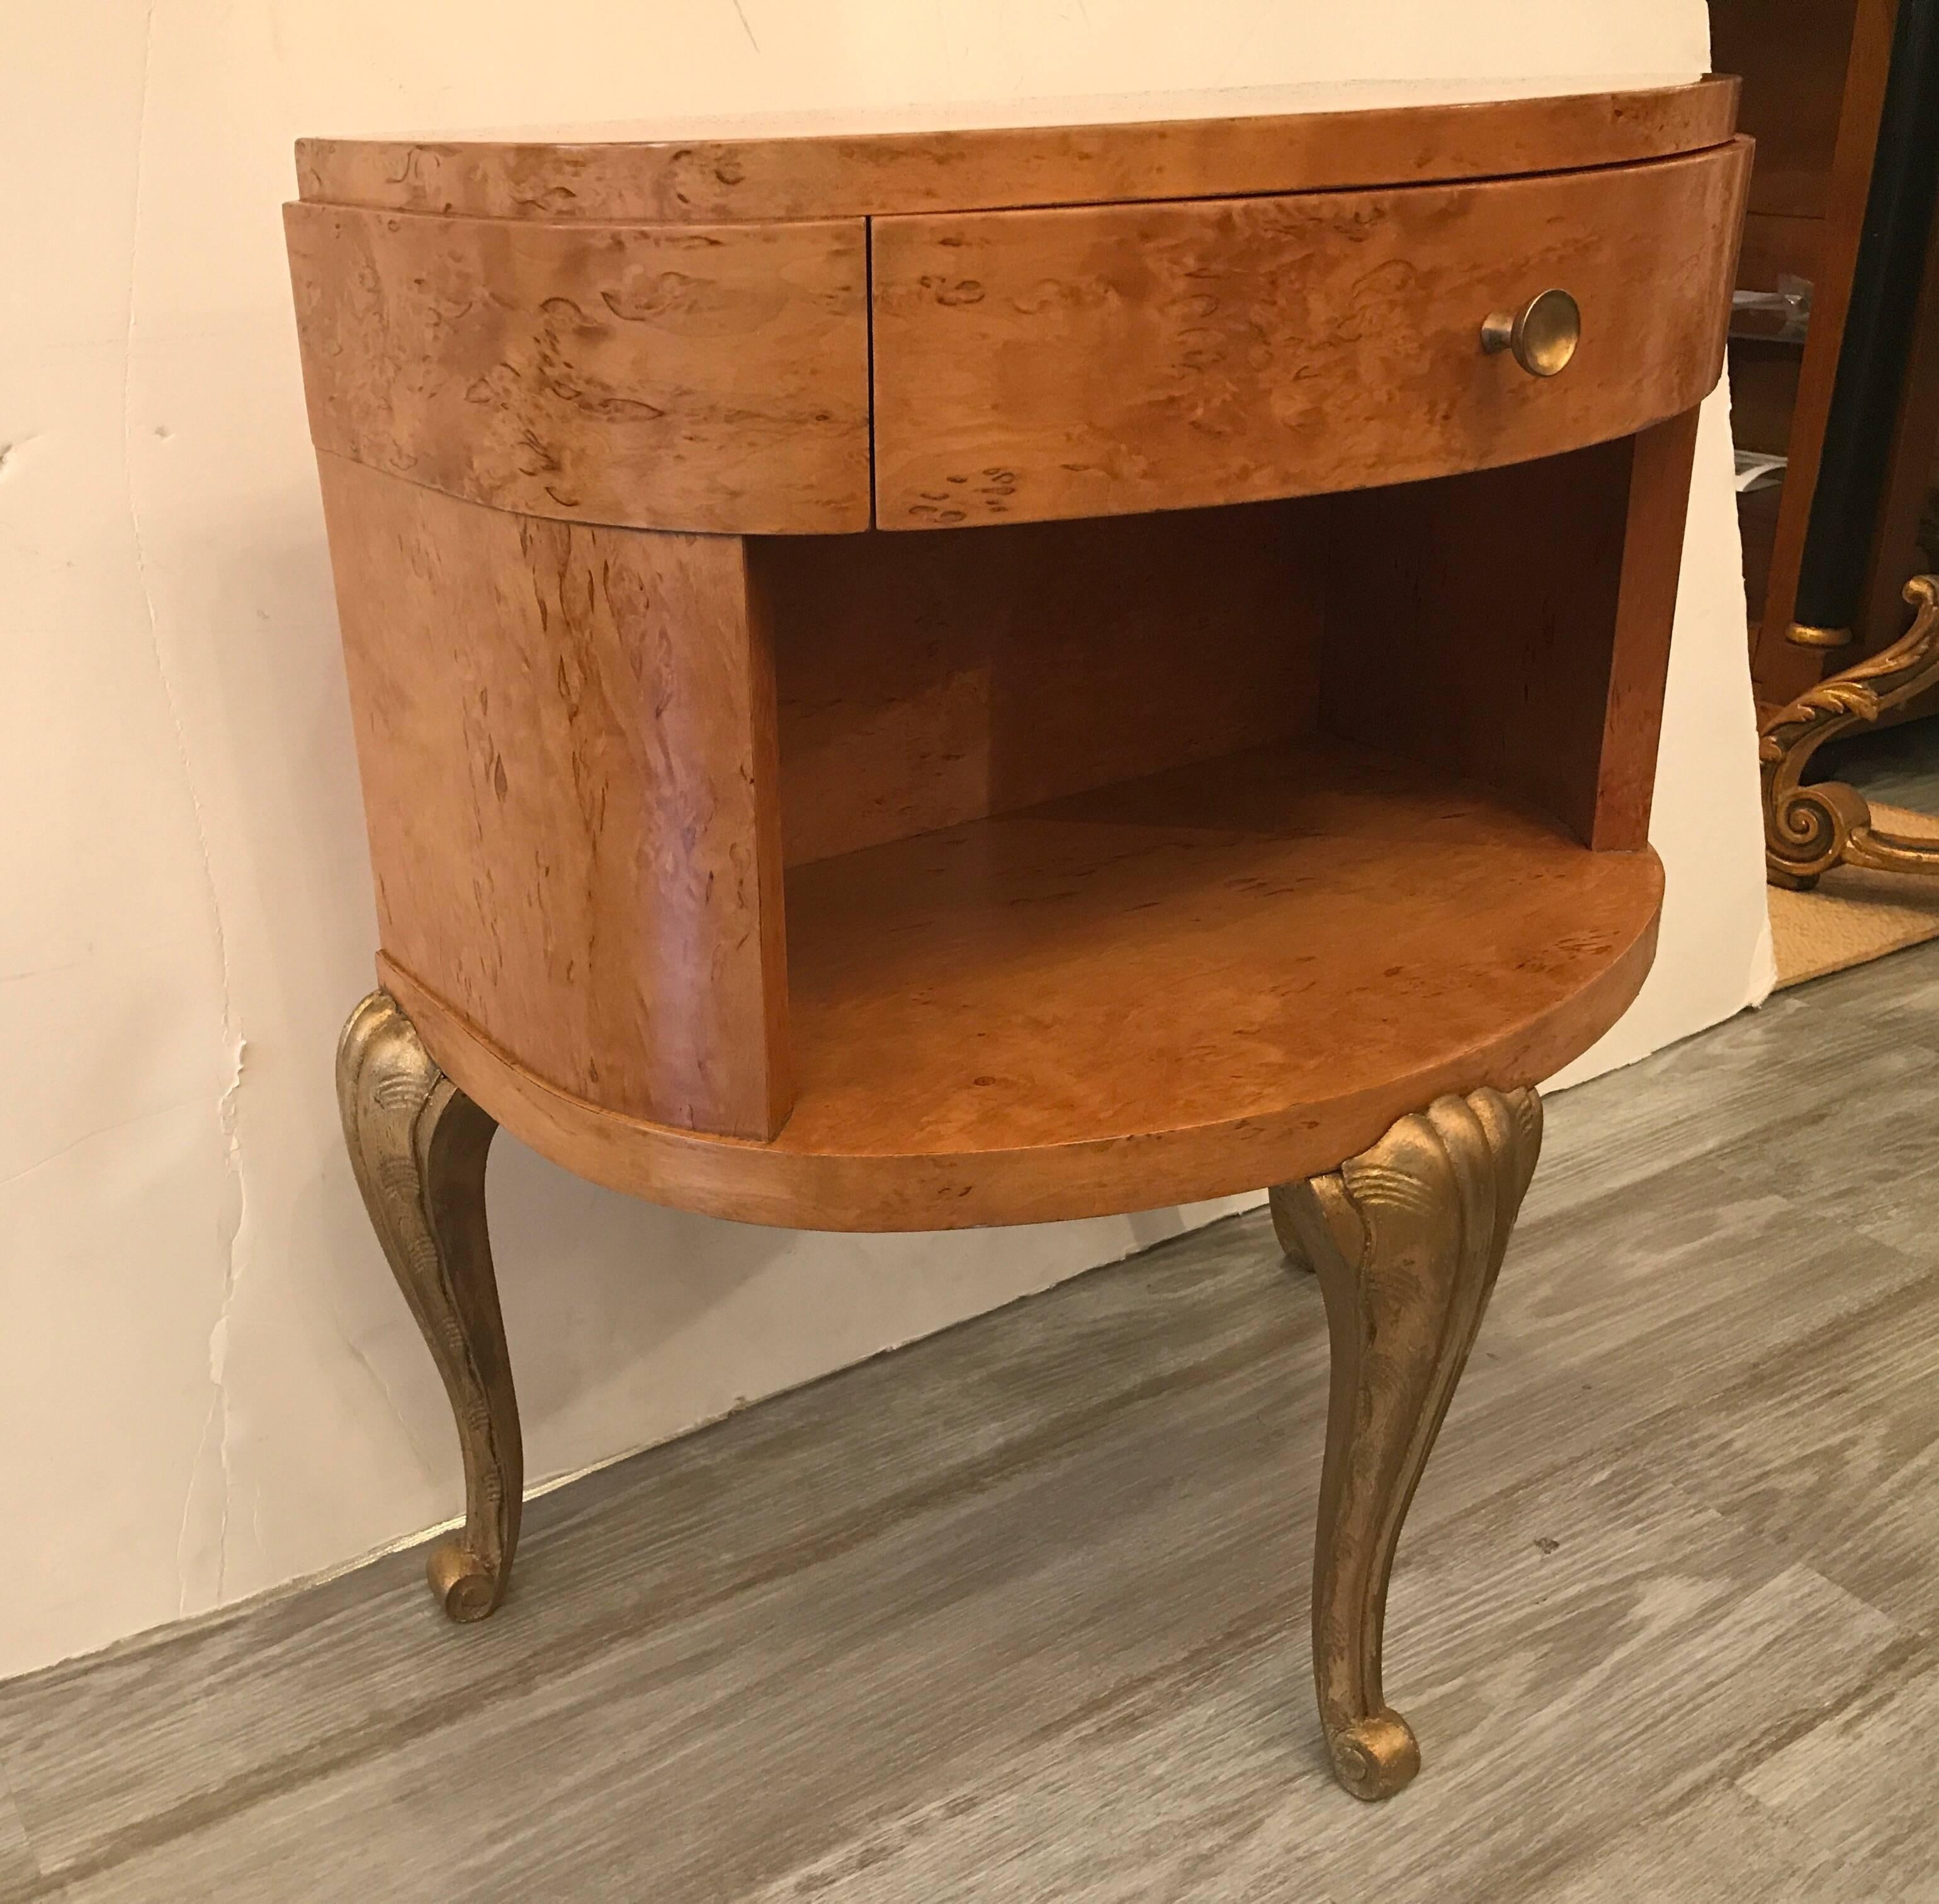 A chic pair of blond wood nightstands. The carved legs with gilt finish support the demilune shape tops. One central drawer over and open display section. Very nice finish on both.